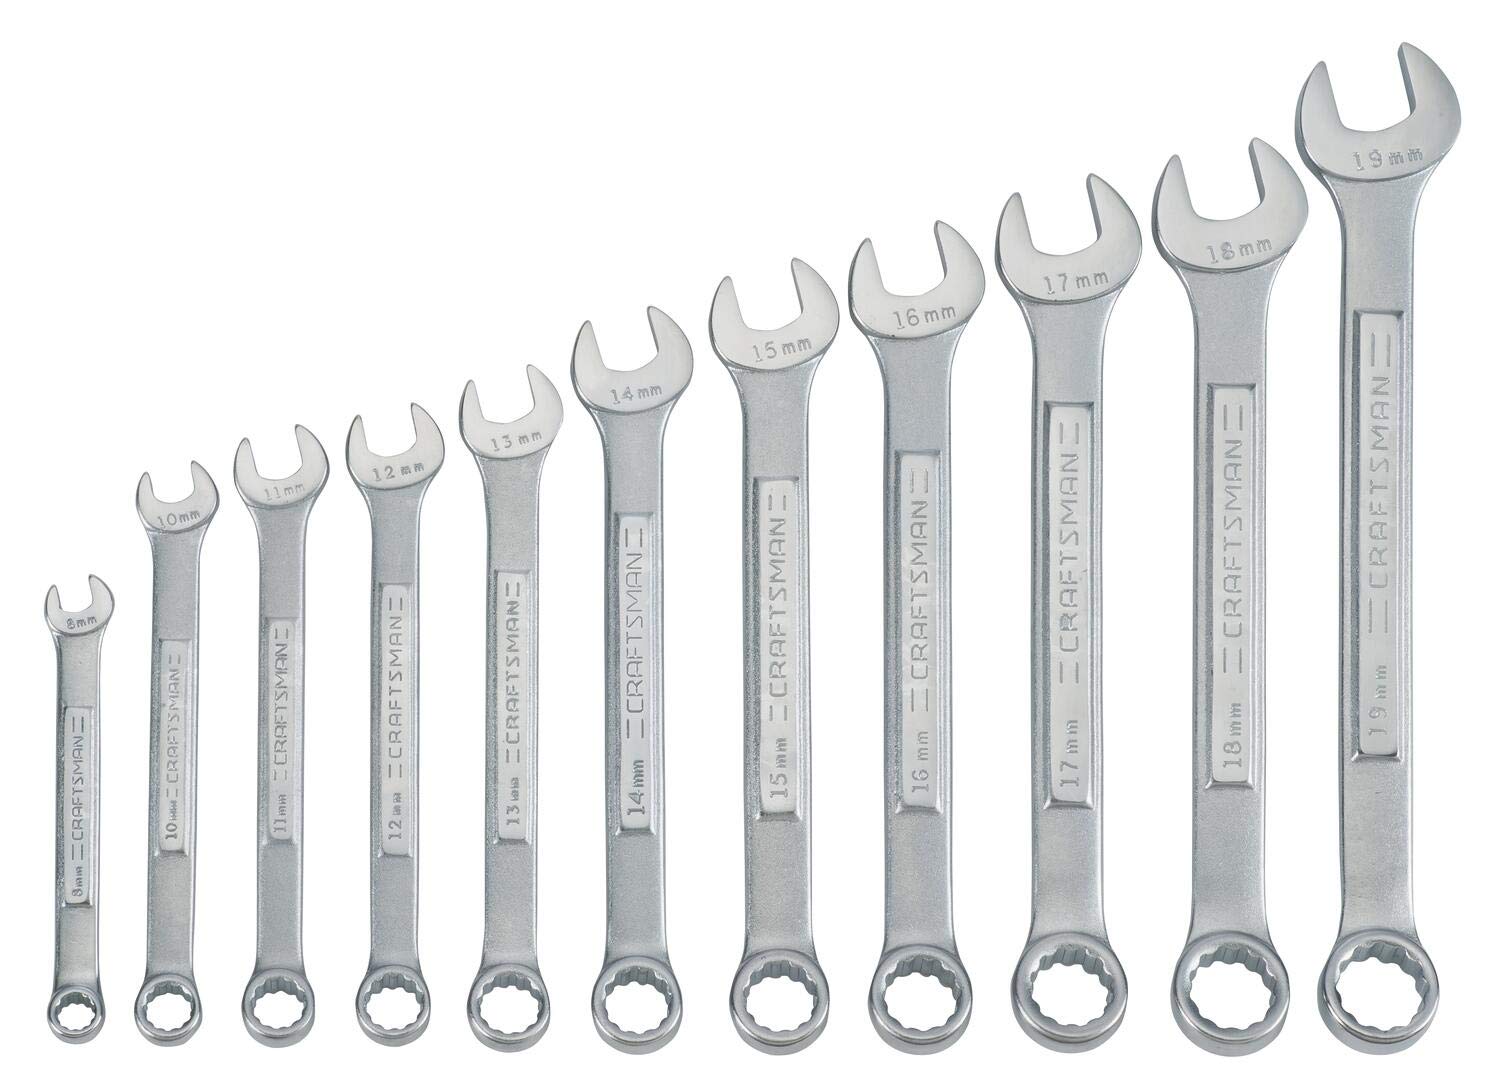 11-Piece Craftsman Wrench Set (Metric) $25 + Free Shipping w/ Prime or on $35+